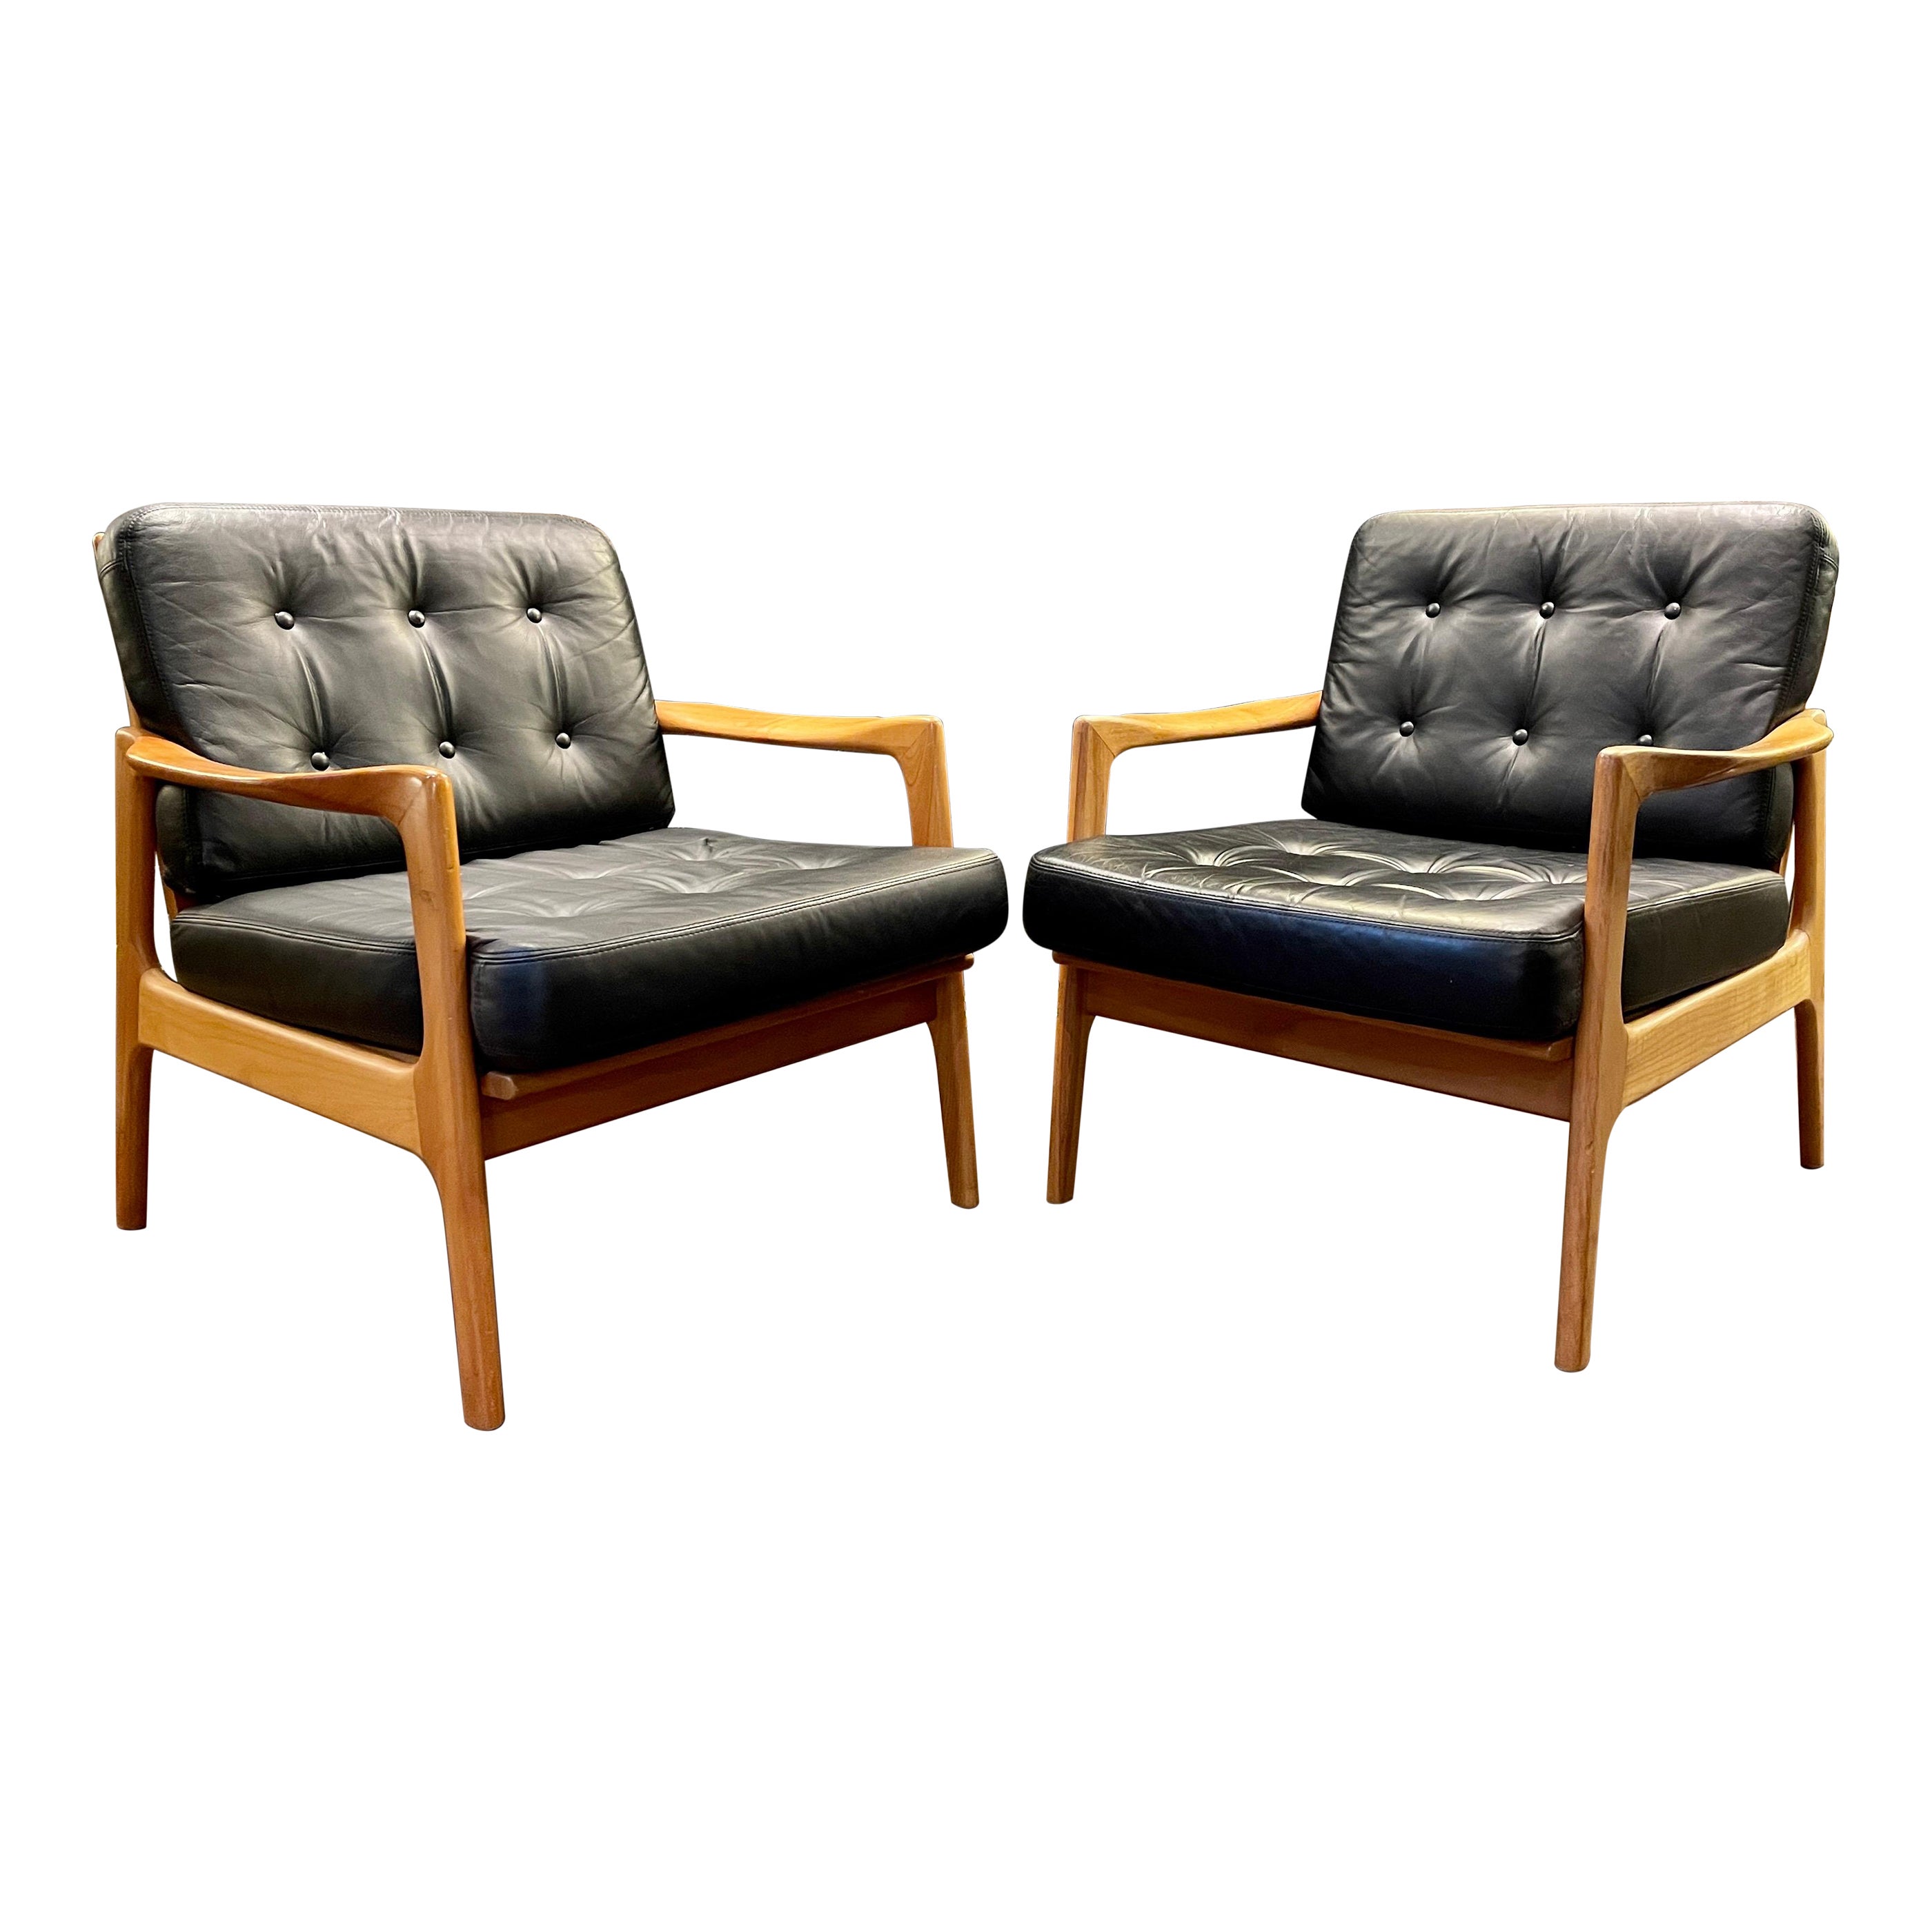 Pair of Danish Black Leather and Cherry Wood Armchairs For Sale